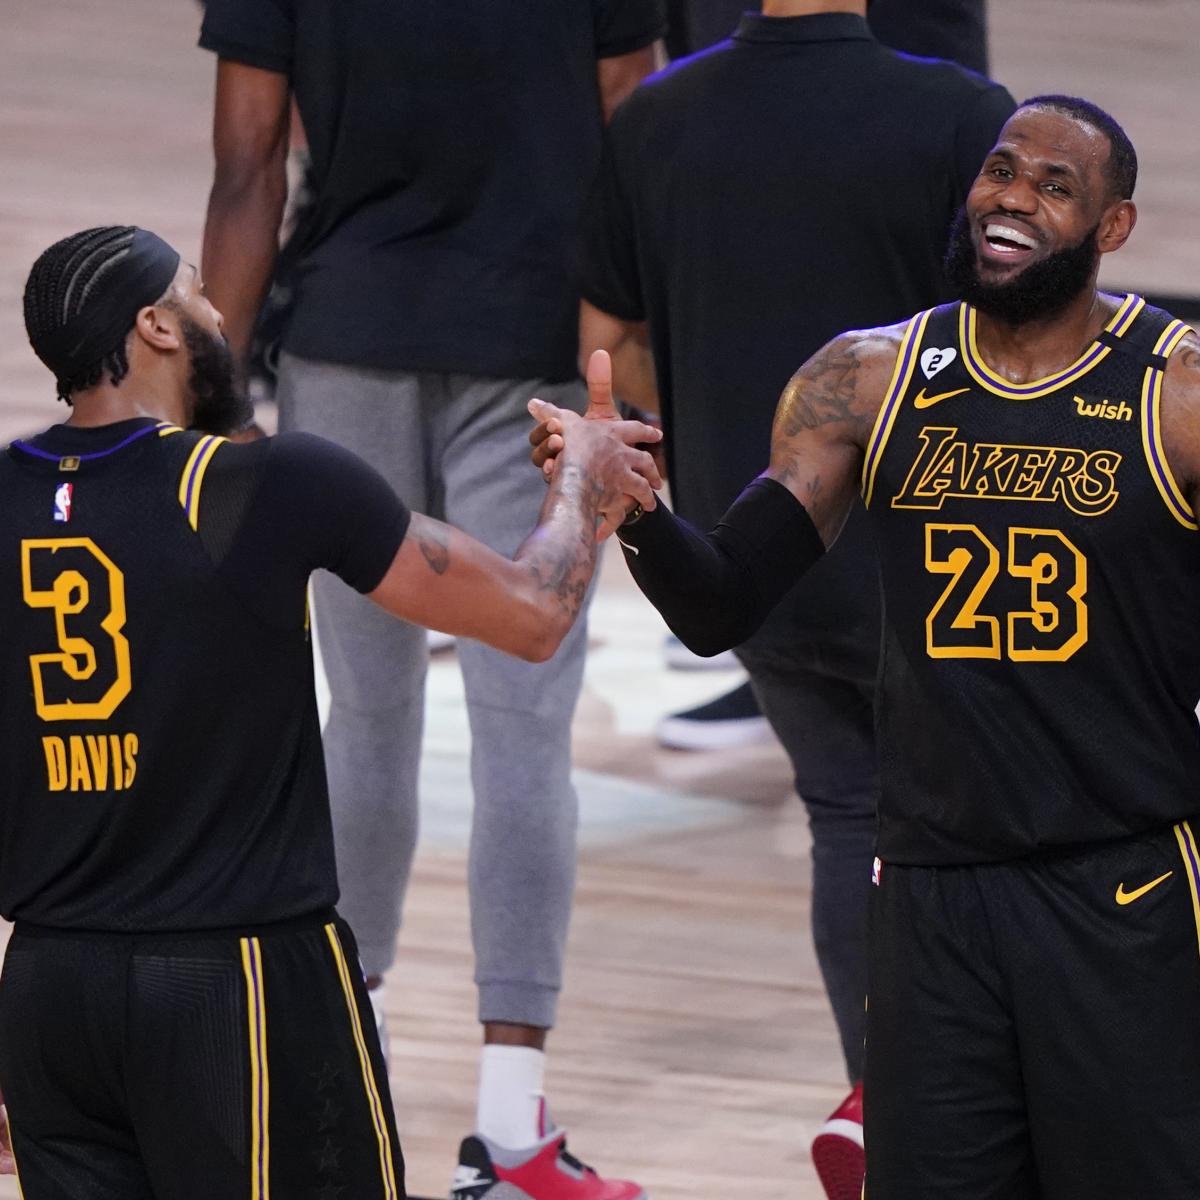 NBA Finals 2020: Predictions, Championship Odds for Remaining Teams